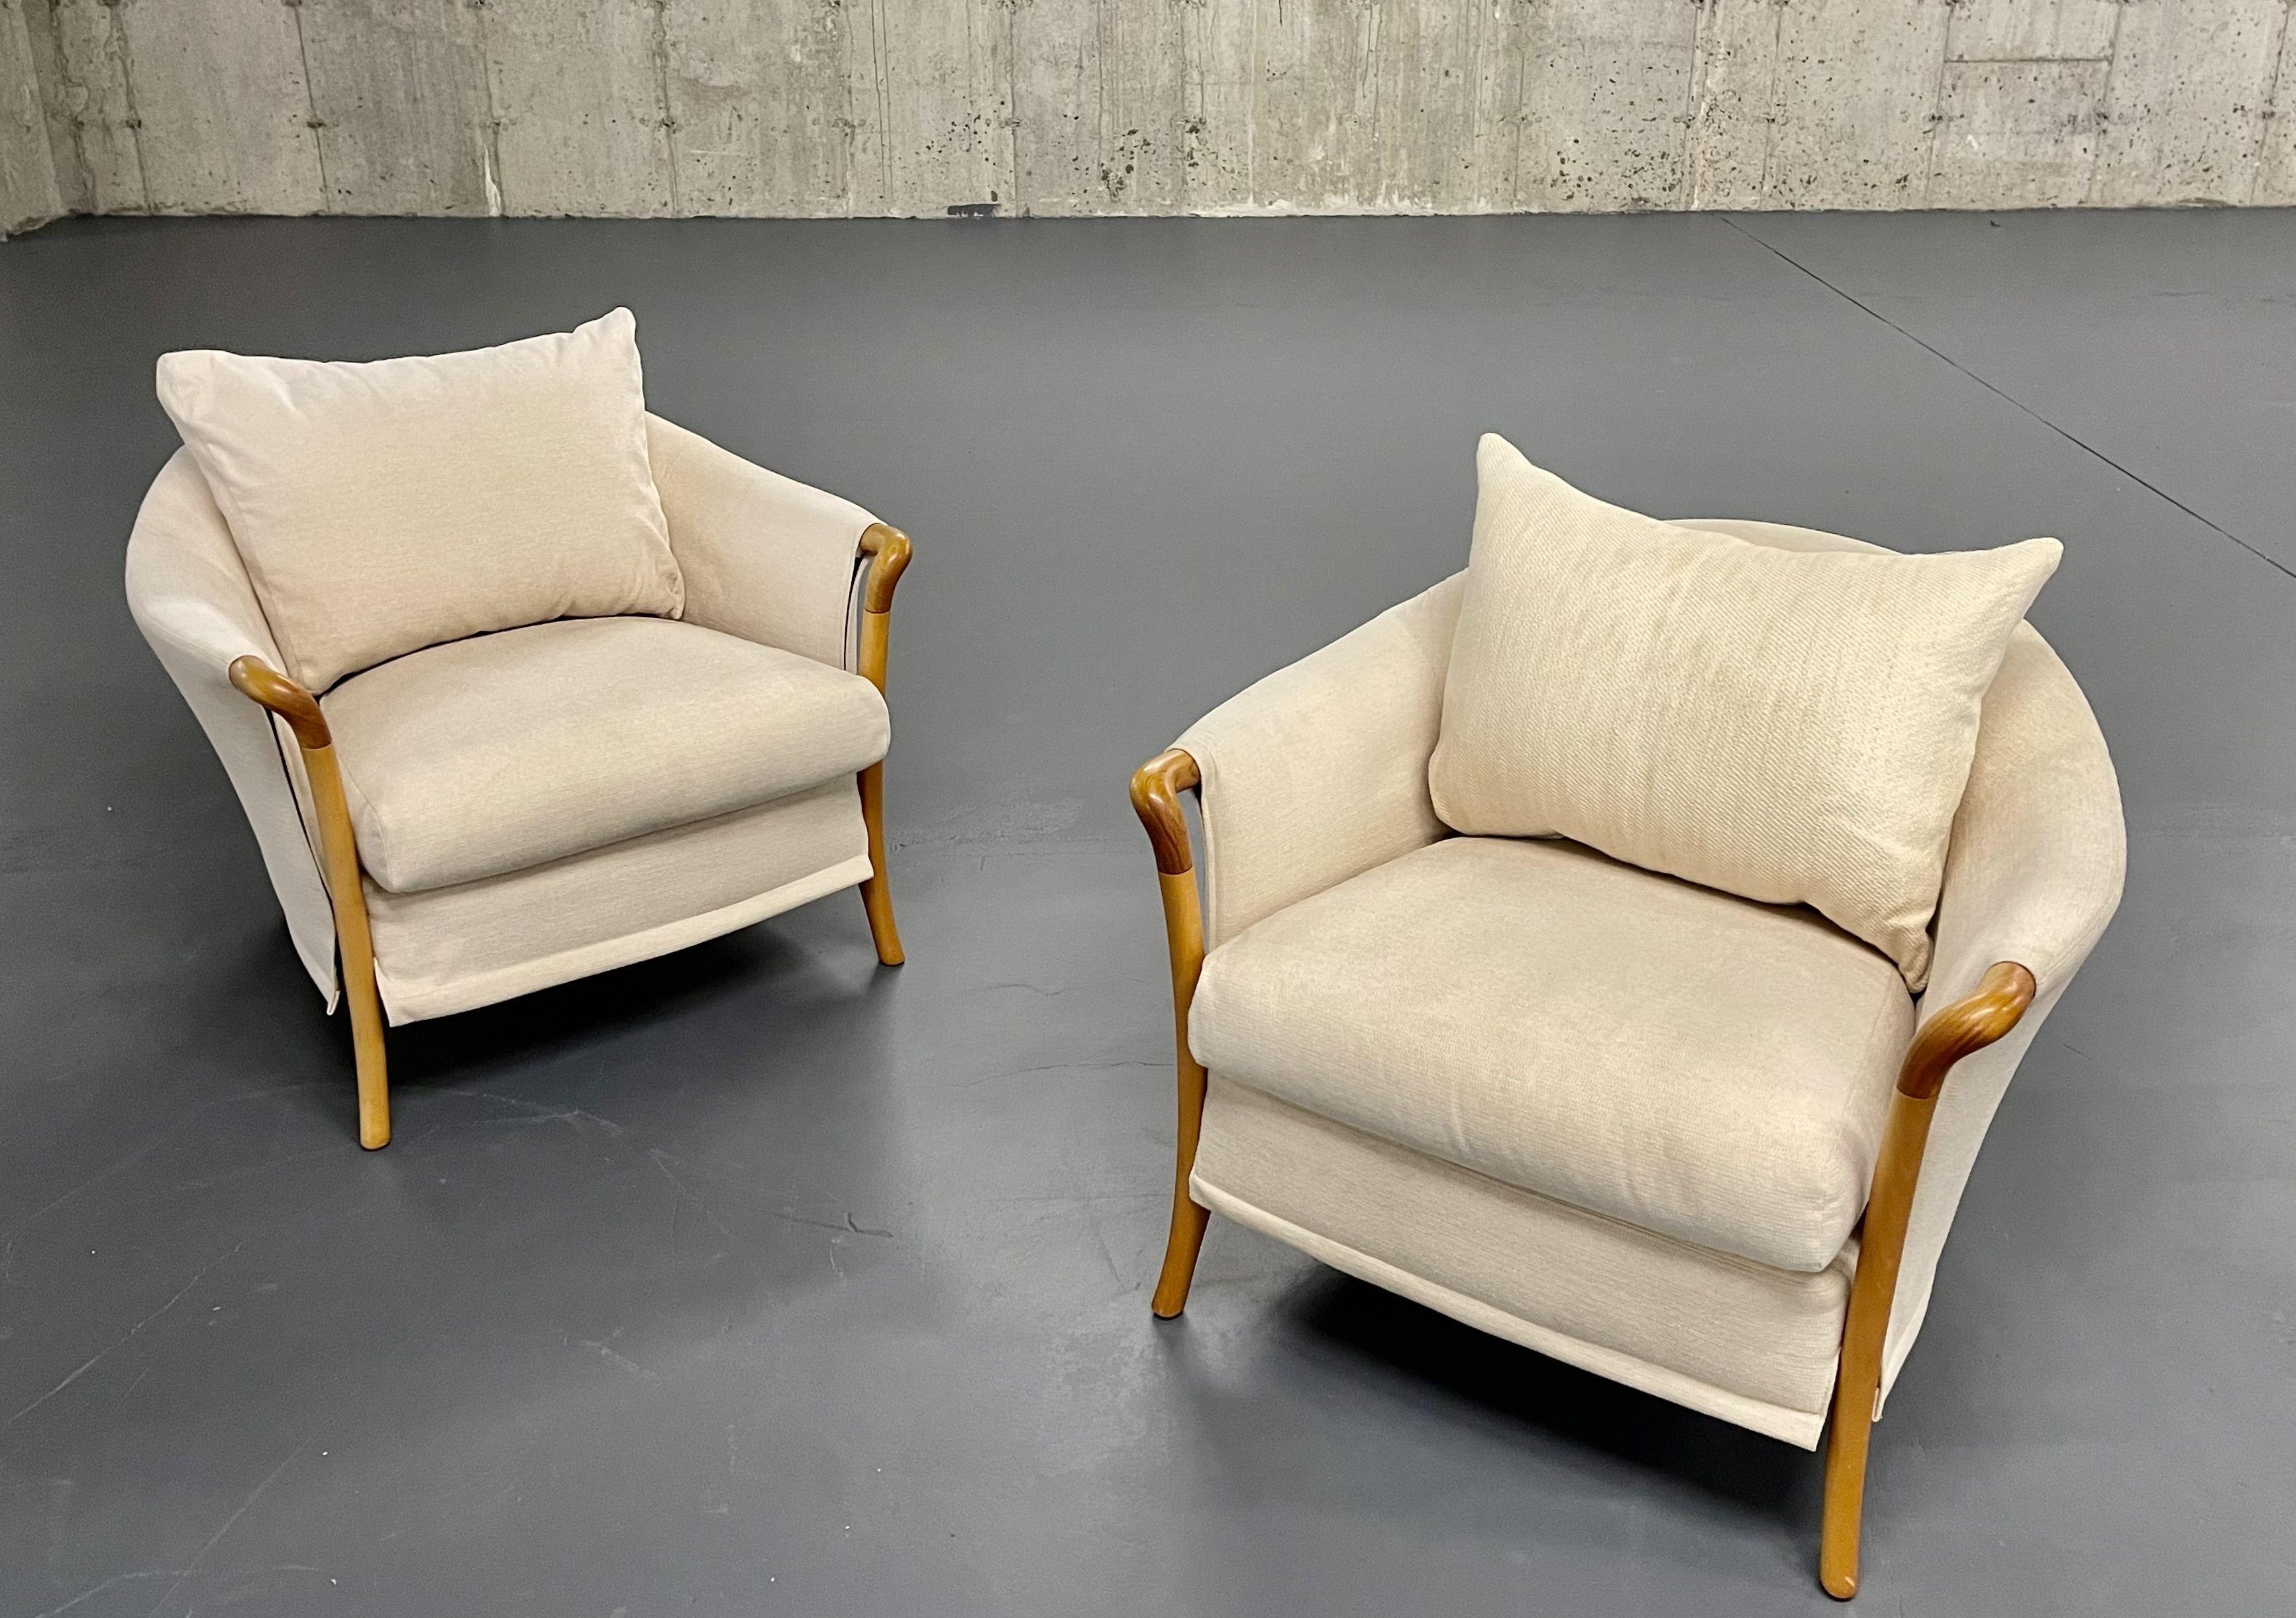 Pair of 'Progetti' Easy Chairs by Umberto Asnago for Giorgetti, Italy
 
Upholstered Chairs, having exposed wood arms. A stunning finely conditioned pair of Arm or Bergere Chairs. Steam cleaned.

Umberto Asagno started working for Giorgetti in 1968,